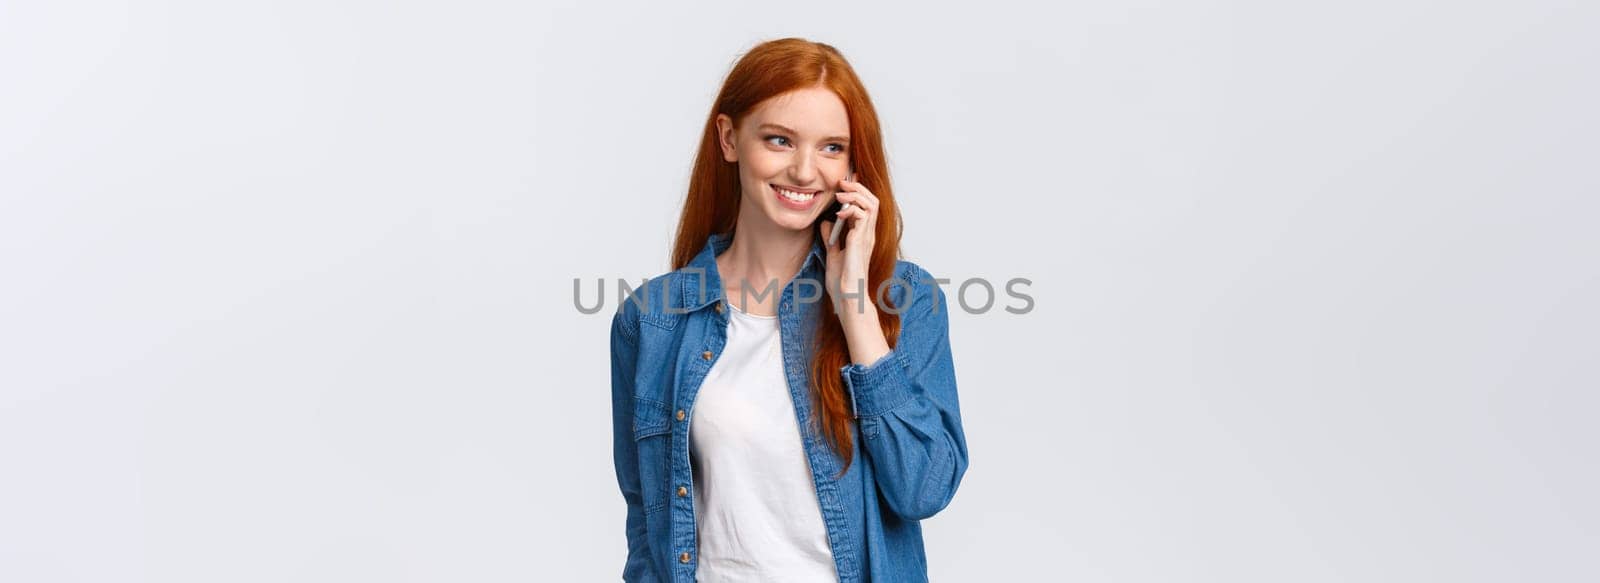 Girl calling boyfriend pick her up after classes. Attractive outgoing redhead woman talking on phone, smiling carefree, look away as having casual conversation on smartphone, white background.